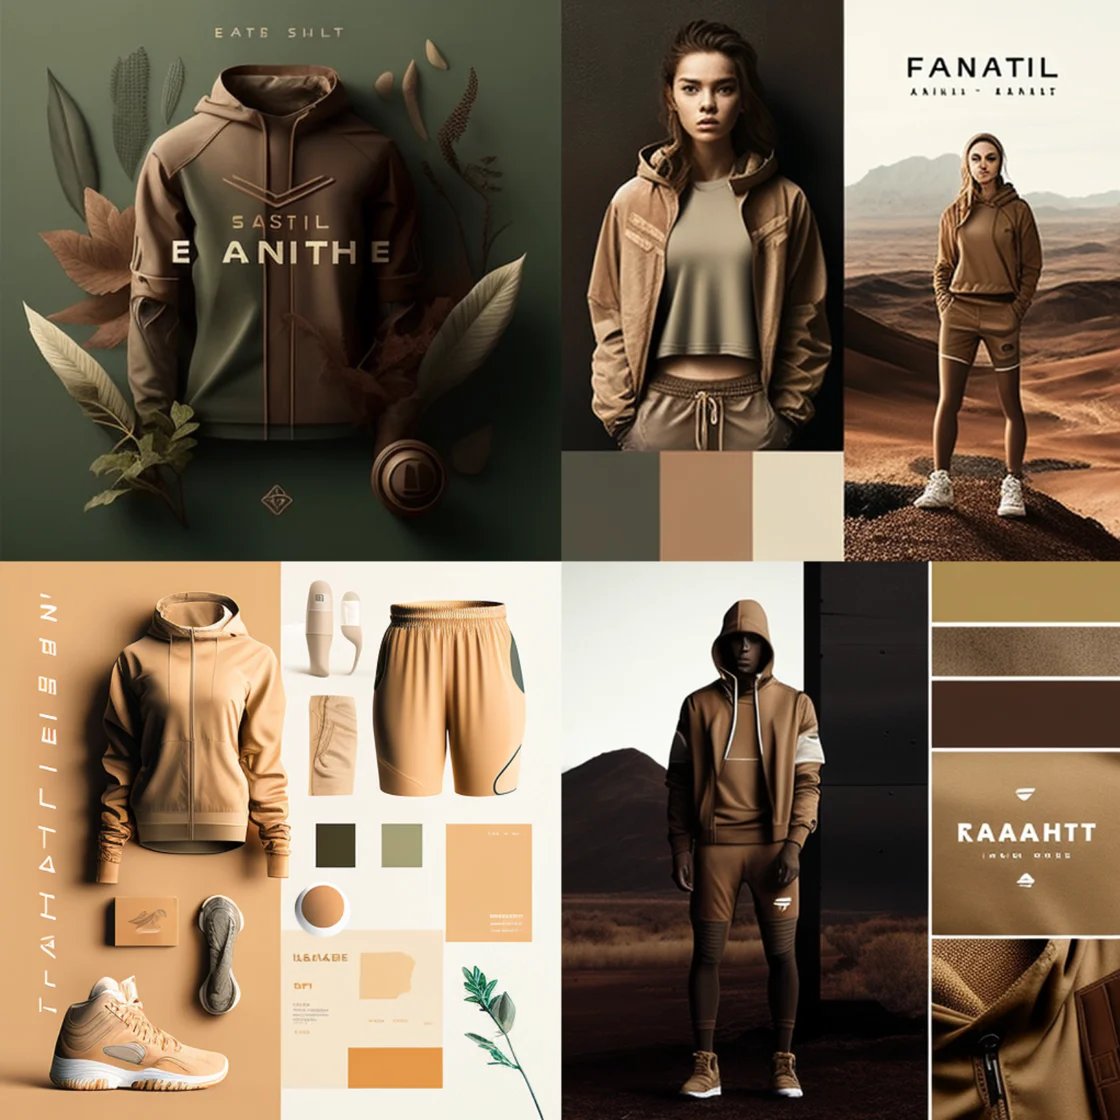 an Athletic Clothing brand using earth tone colors and is minimalistic